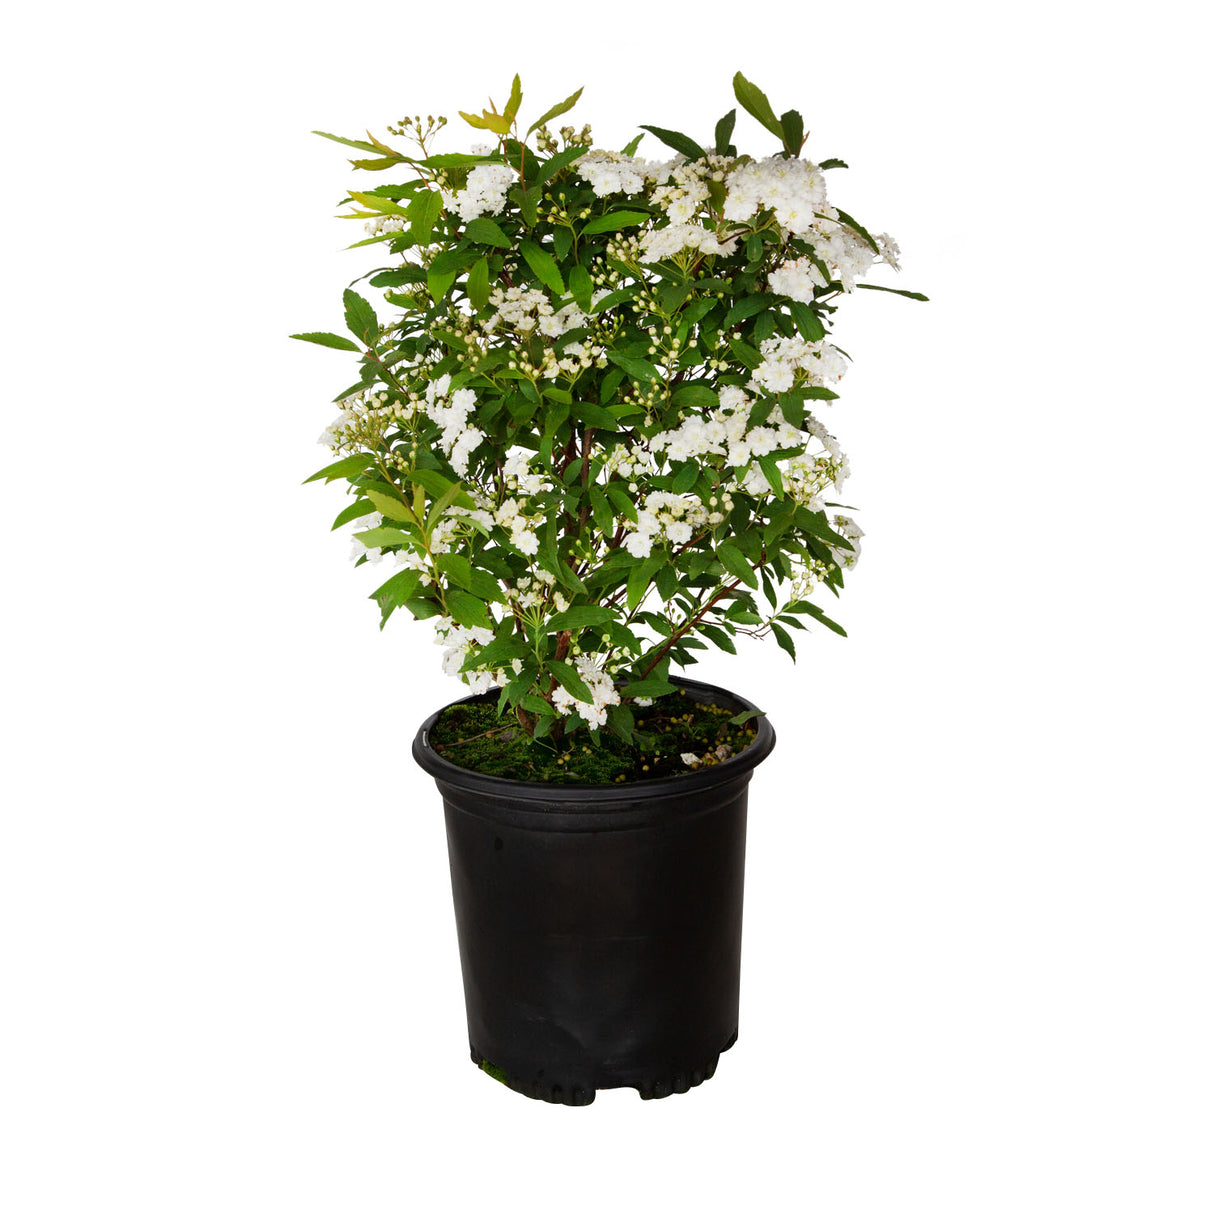 bridal wreath white reeves spirea for sale online live potted plant 